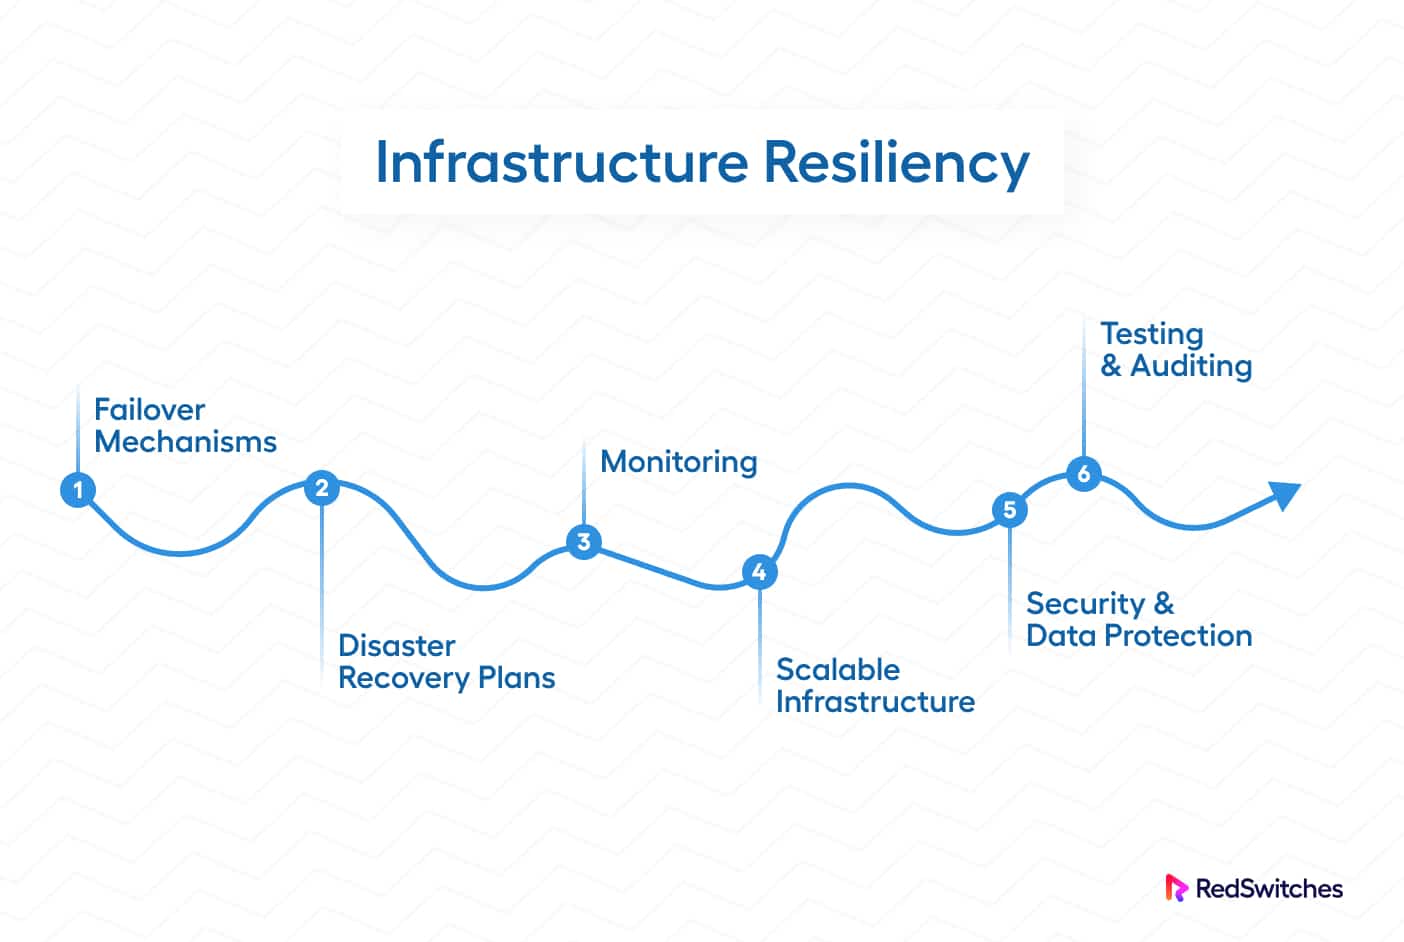 Best Practices to Achieve Infrastructure Resiliency